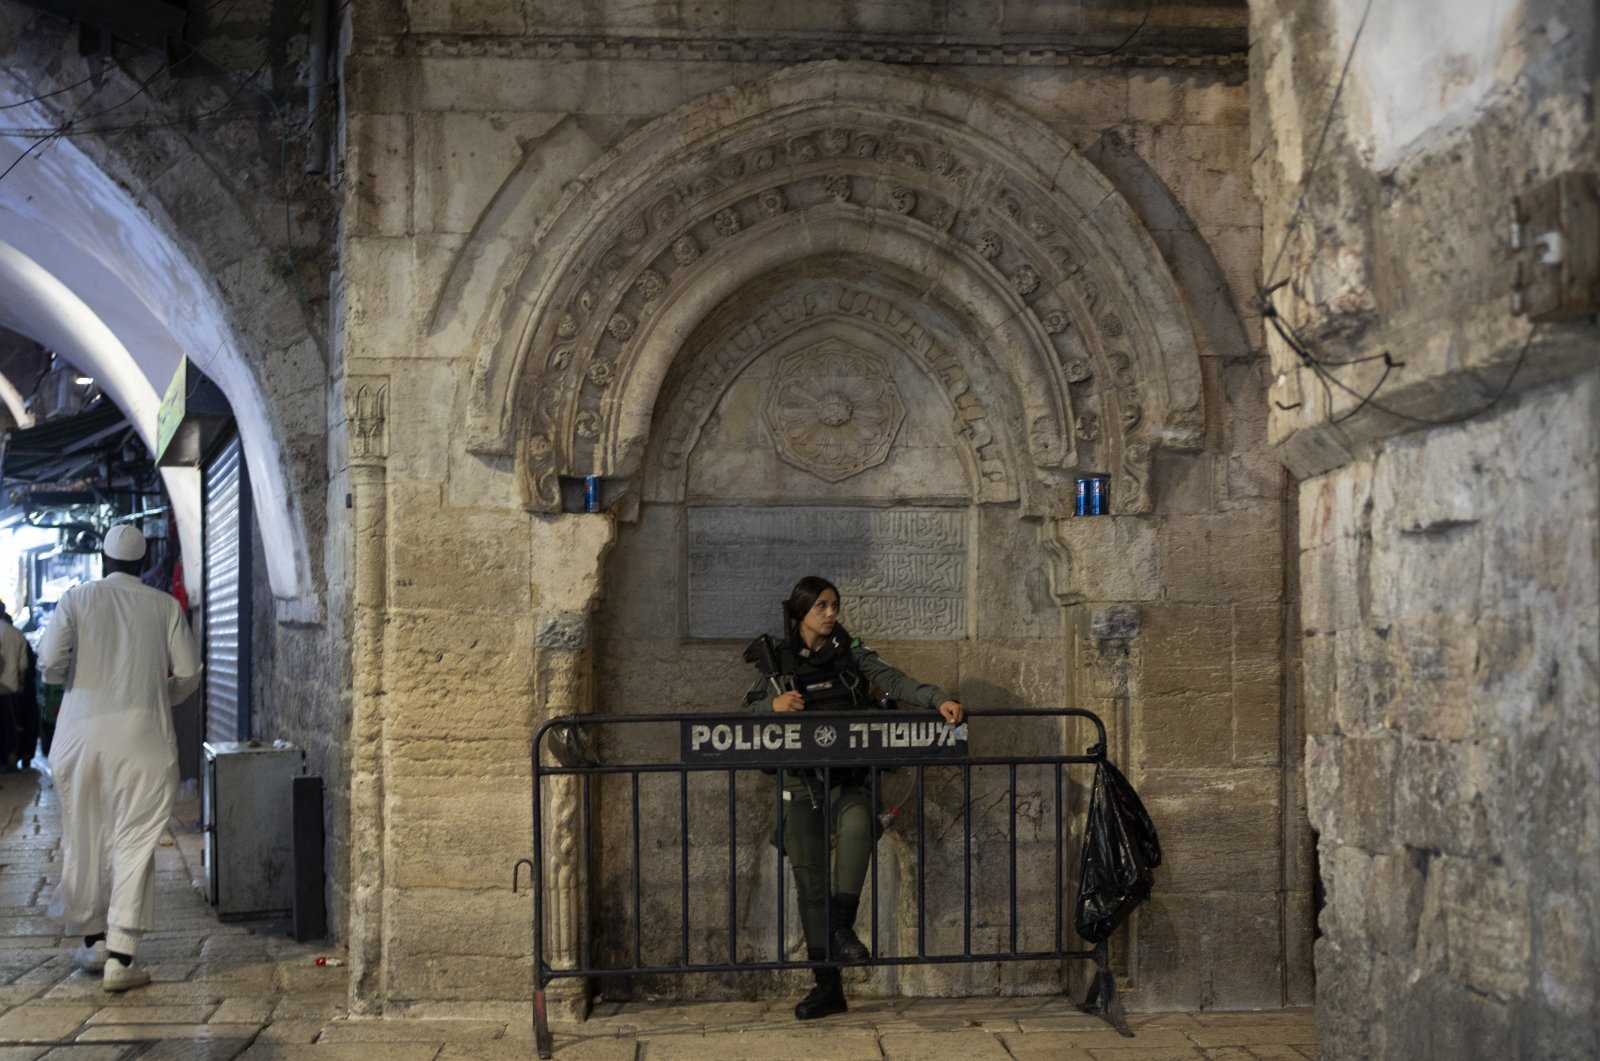 An Israeli border police officer stands at her post near the Al-Aqsa Mosque compound in the Old City of East Jerusalem that is under heightened security for Rosh Hashanah, the Jewish new year, occupied Palestine, Sept. 26, 2022. (AP Photo)